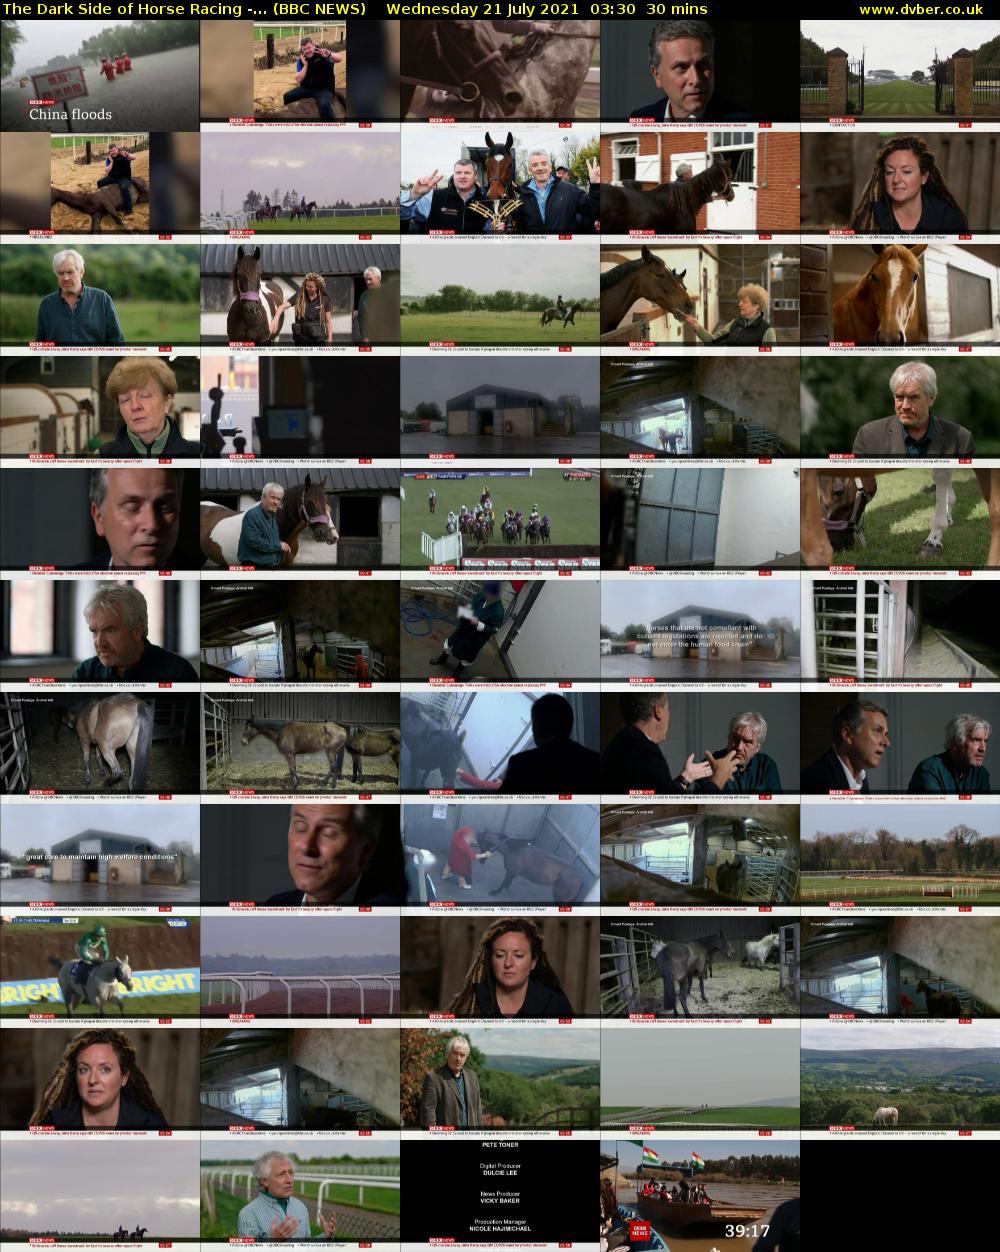 The Dark Side of Horse Racing -... (BBC NEWS) Wednesday 21 July 2021 03:30 - 04:00